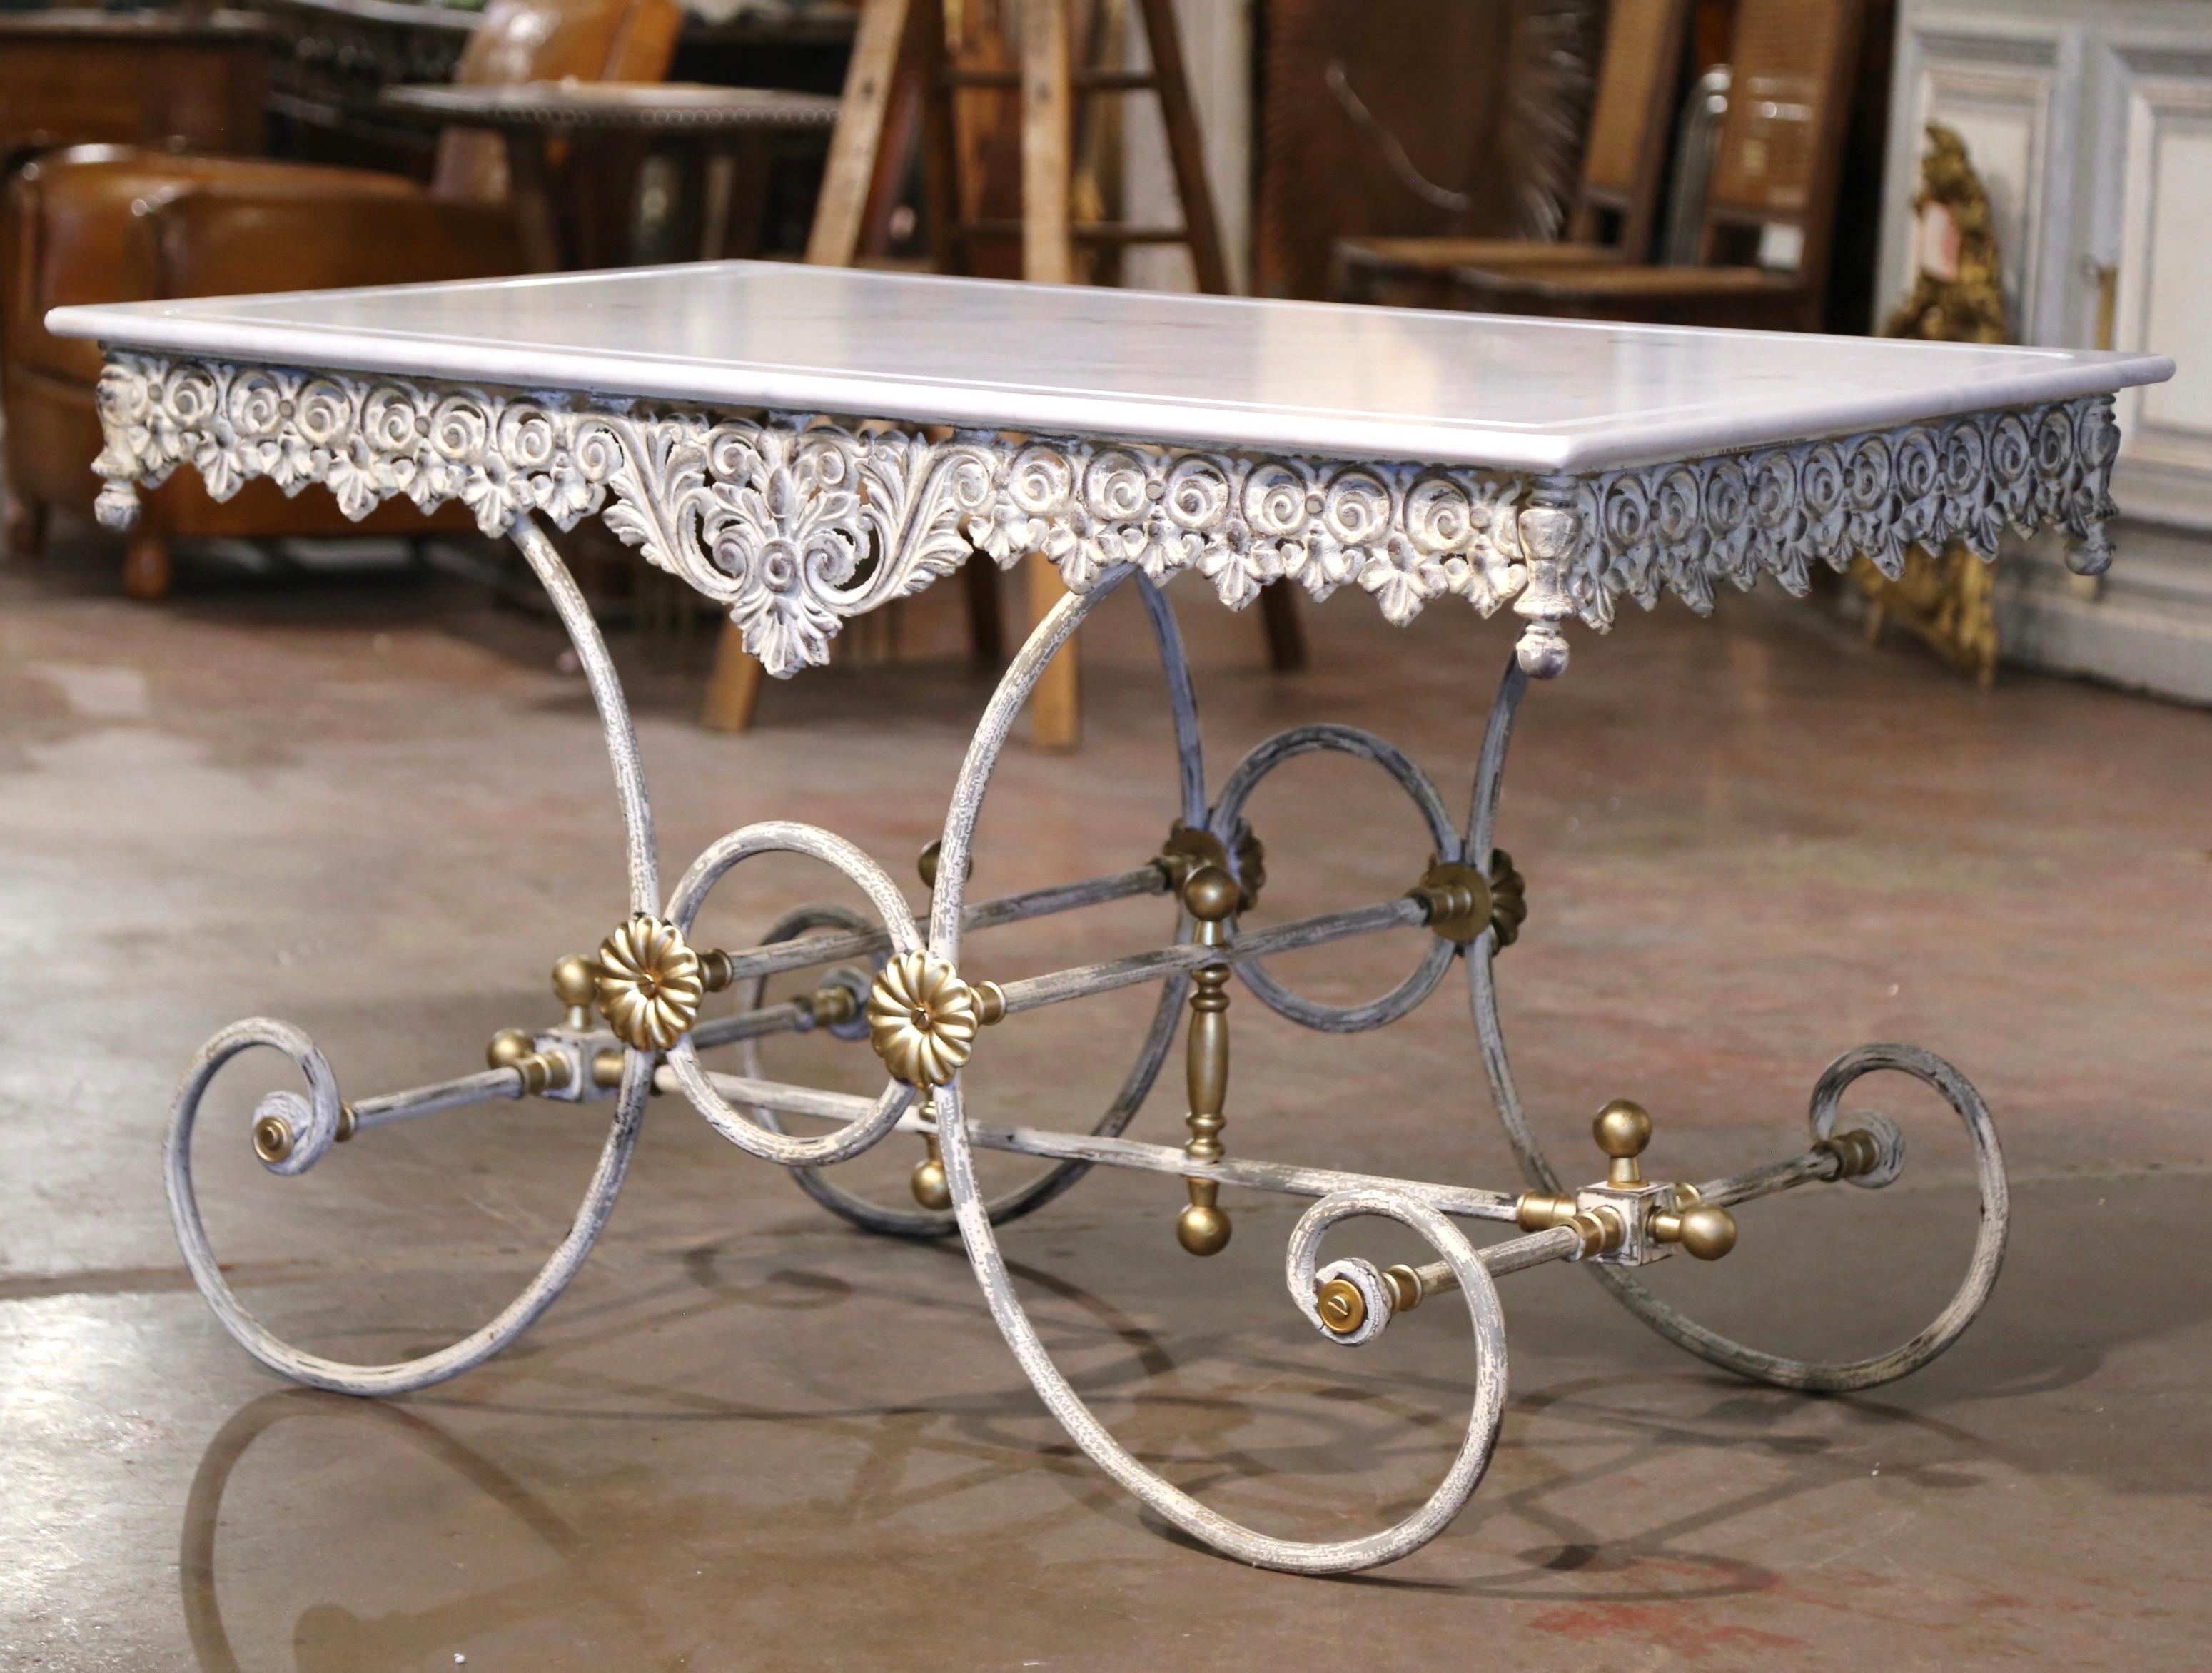 This French butcher table, or pastry table would add the ideal amount of surface space to any kitchen. Crafted in France, the table stands on four scrolled legs over an intricate stretcher and decorative bronze rosettes and finials. The table